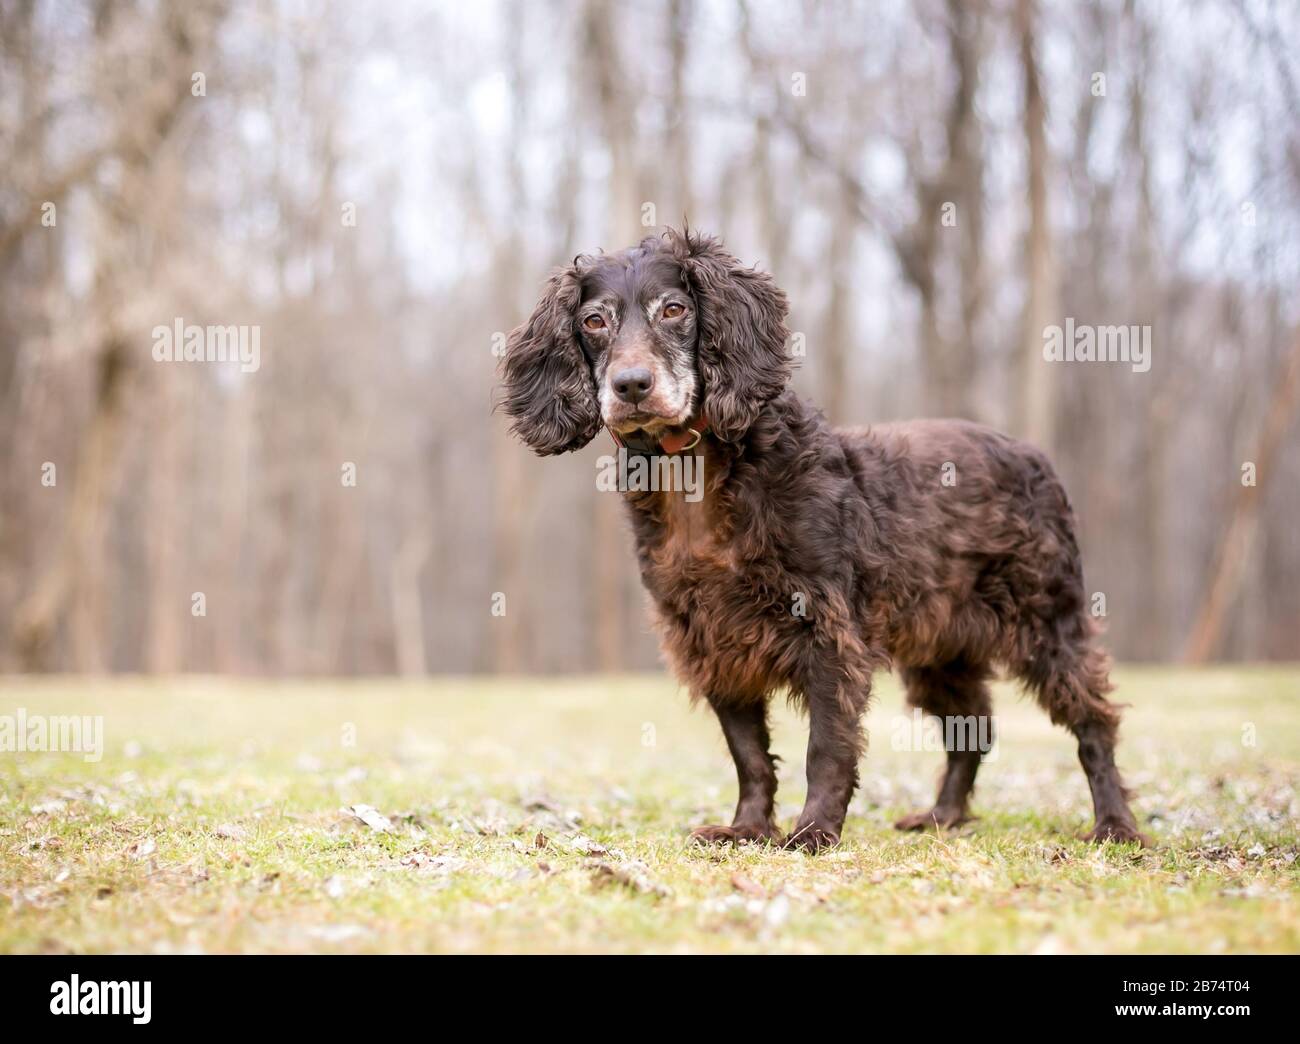 A brown Cocker Spaniel dog standing outdoors Stock Photo